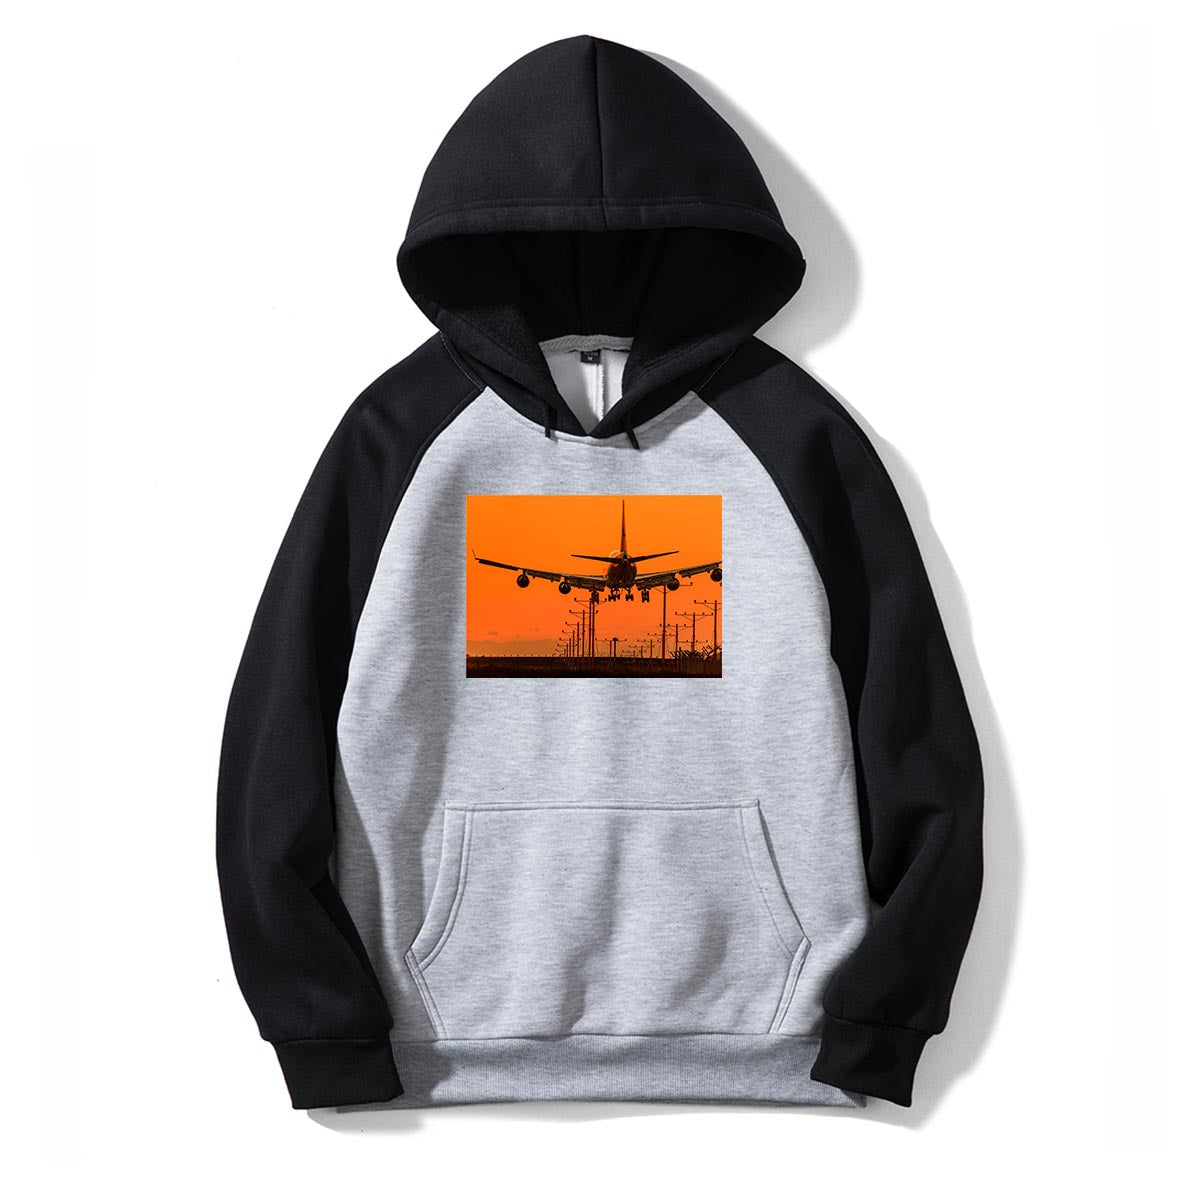 Close up to Boeing 747 Landing at Sunset Designed Colourful Hoodies